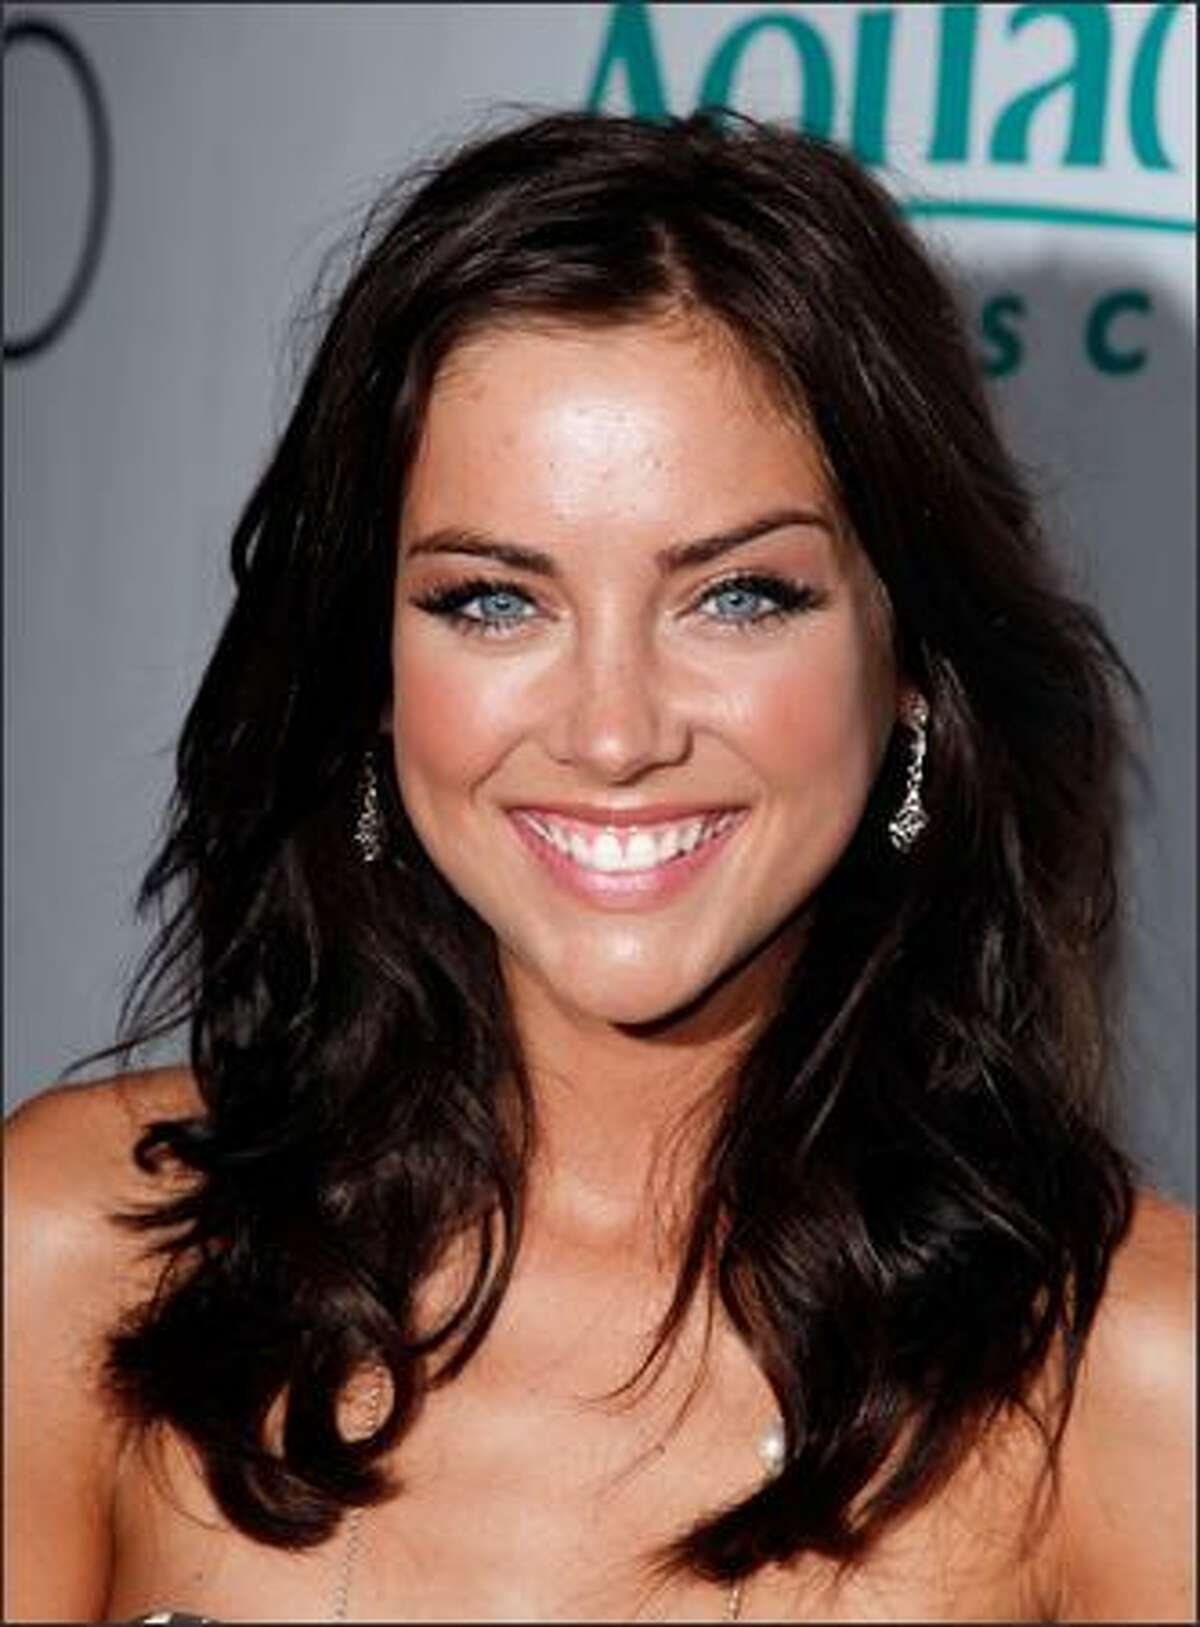 Actress Jessica Stroup arrives at the premiere party for the CW Network's "90210" on Saturday in Malibu, Calif.